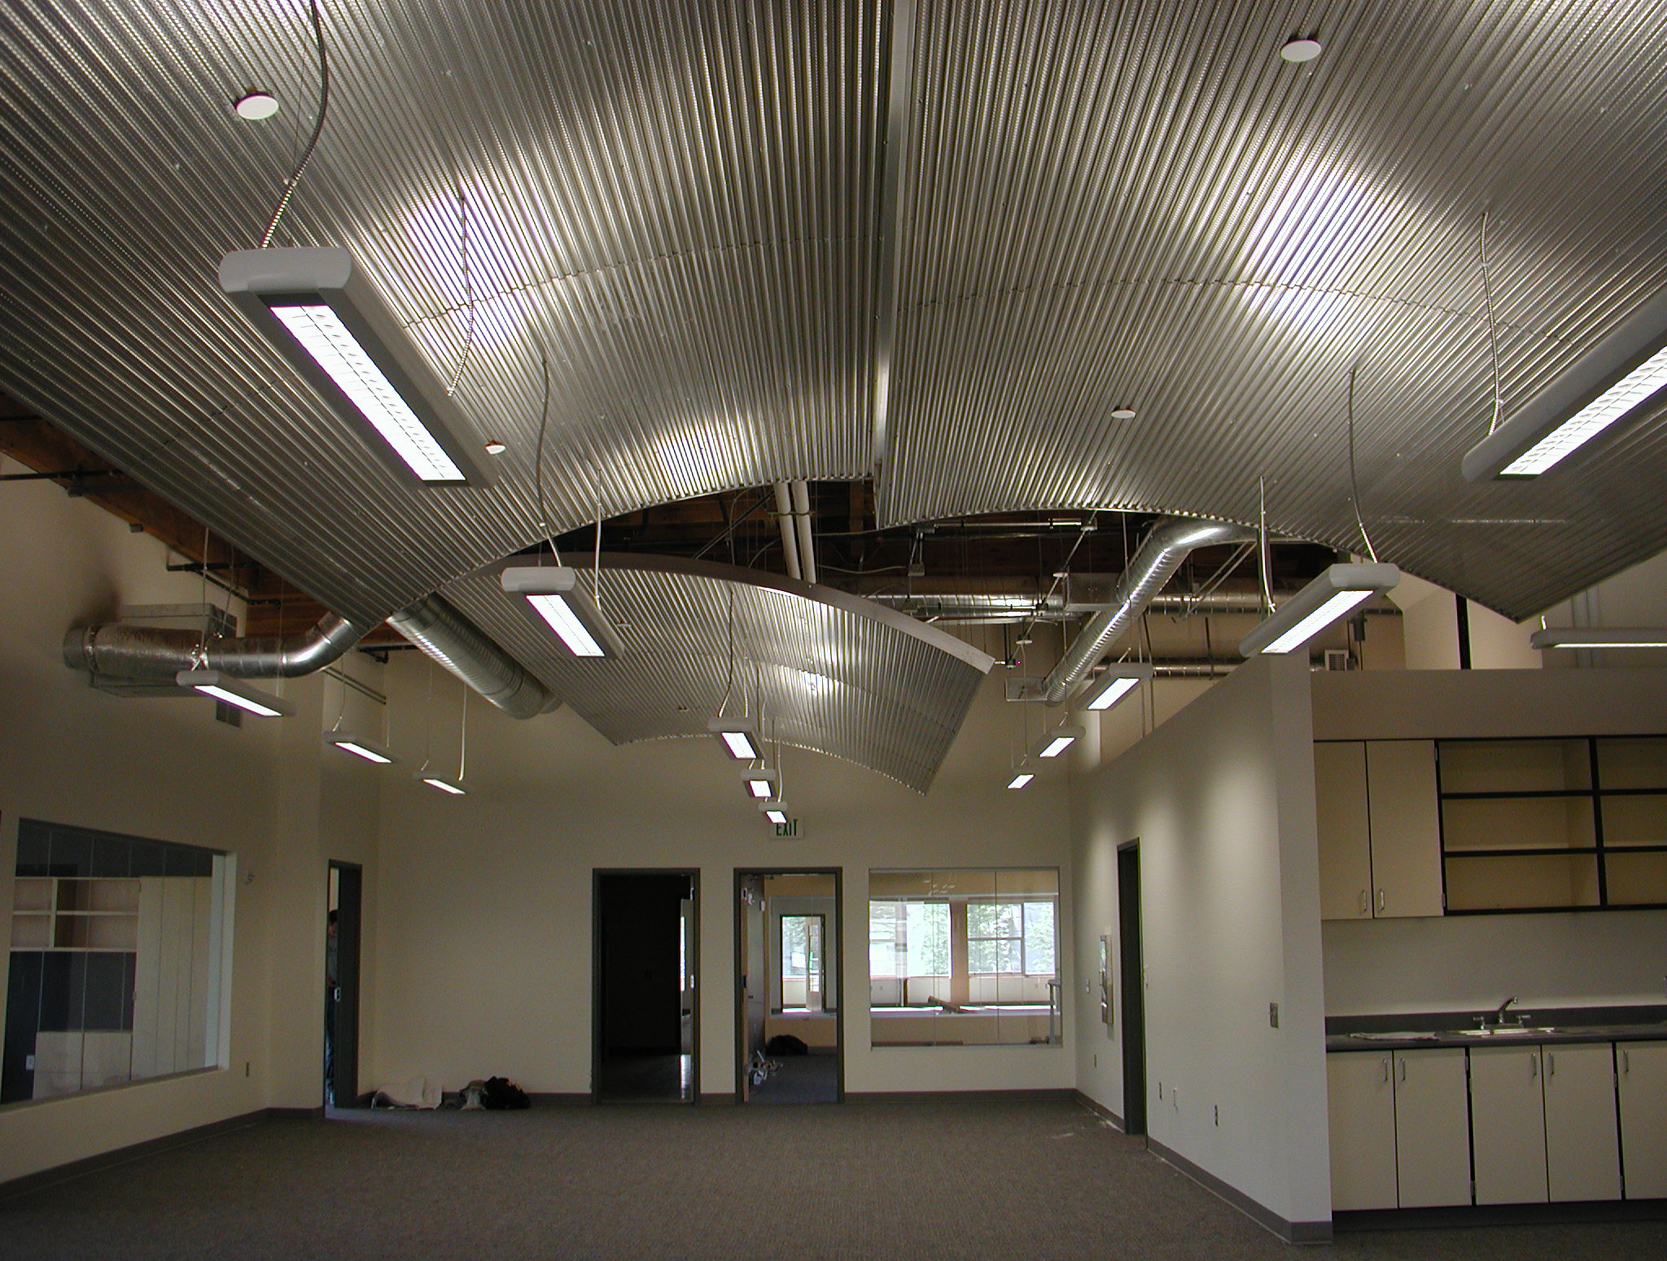 Ripple Pan Corrugated Metal Ceiling and Wall Panels